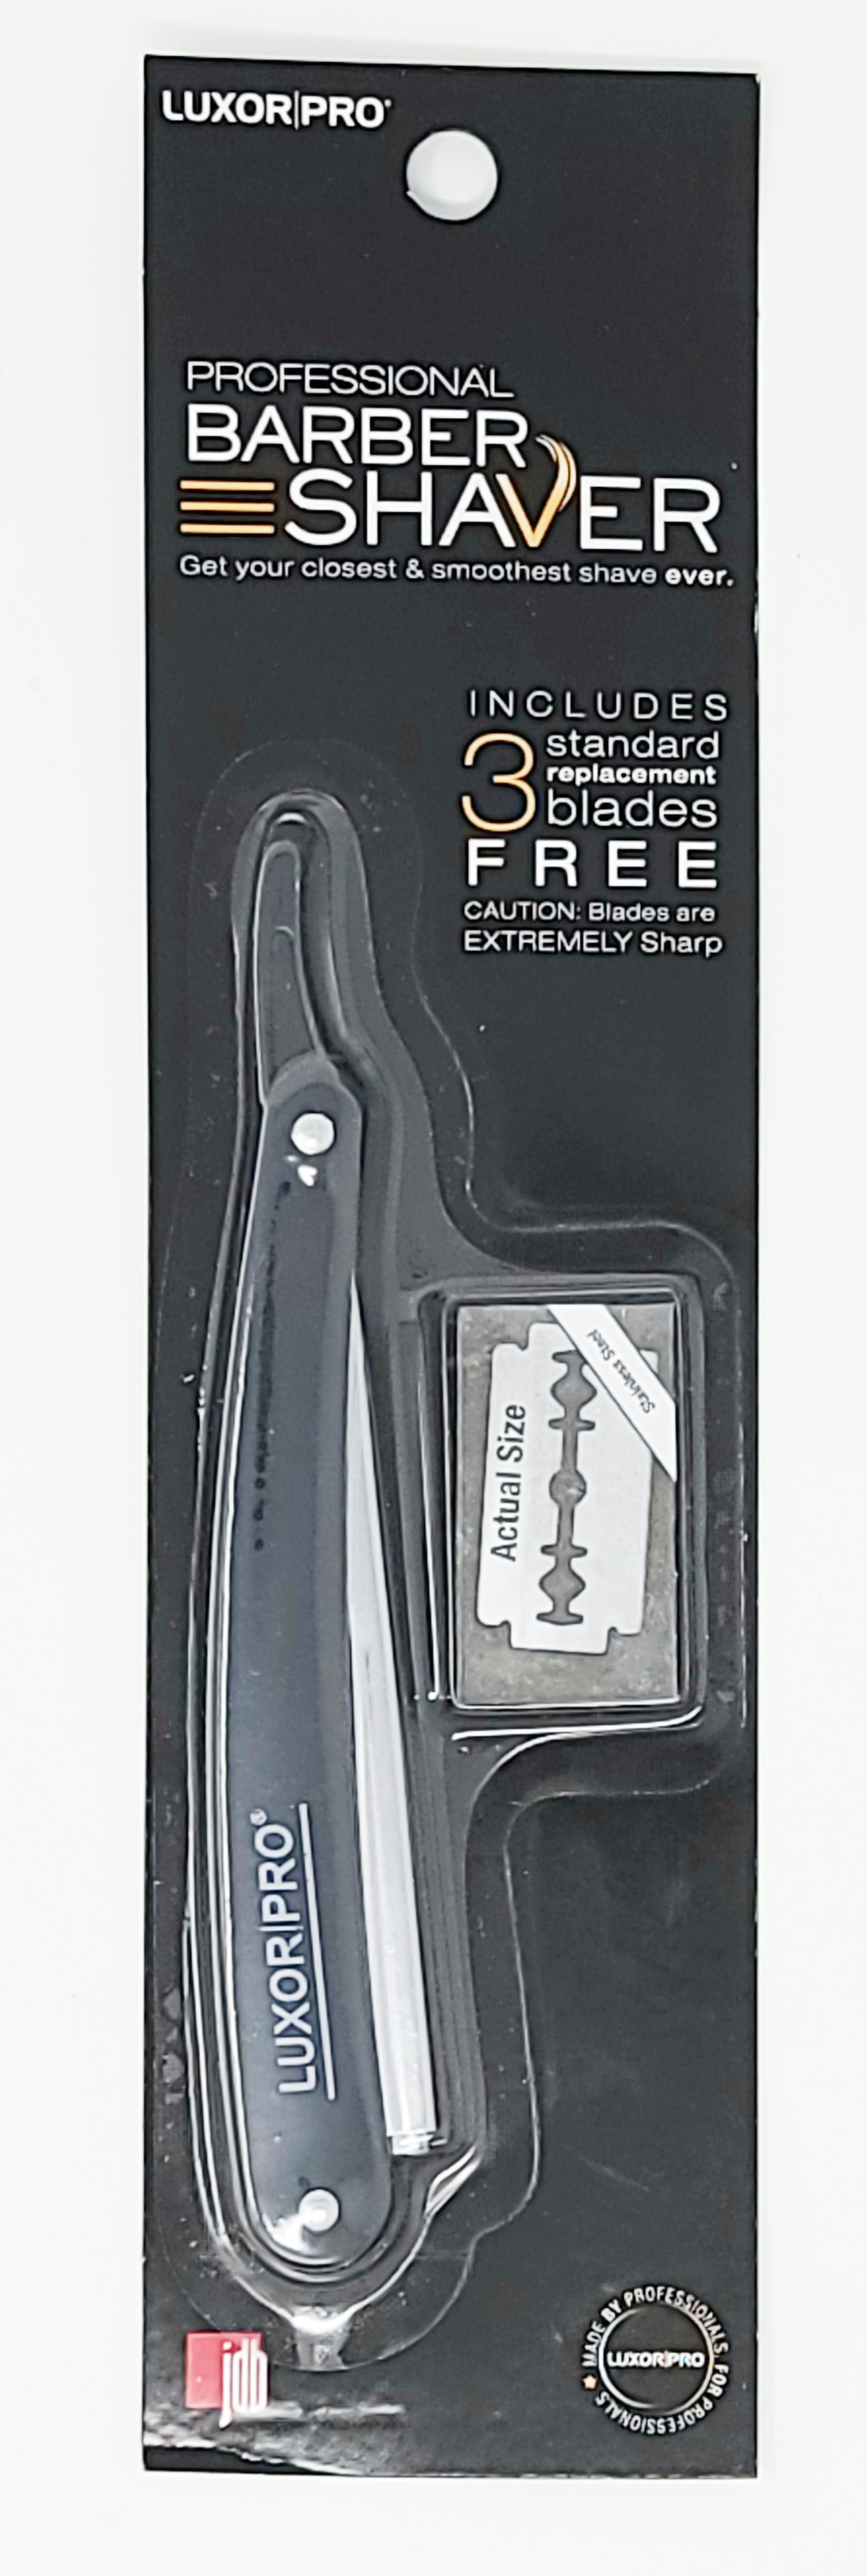 LuXor Pro Barber Shaver Giving You The Closest & Smoothest Shave Ever Includes 2 Free Blades